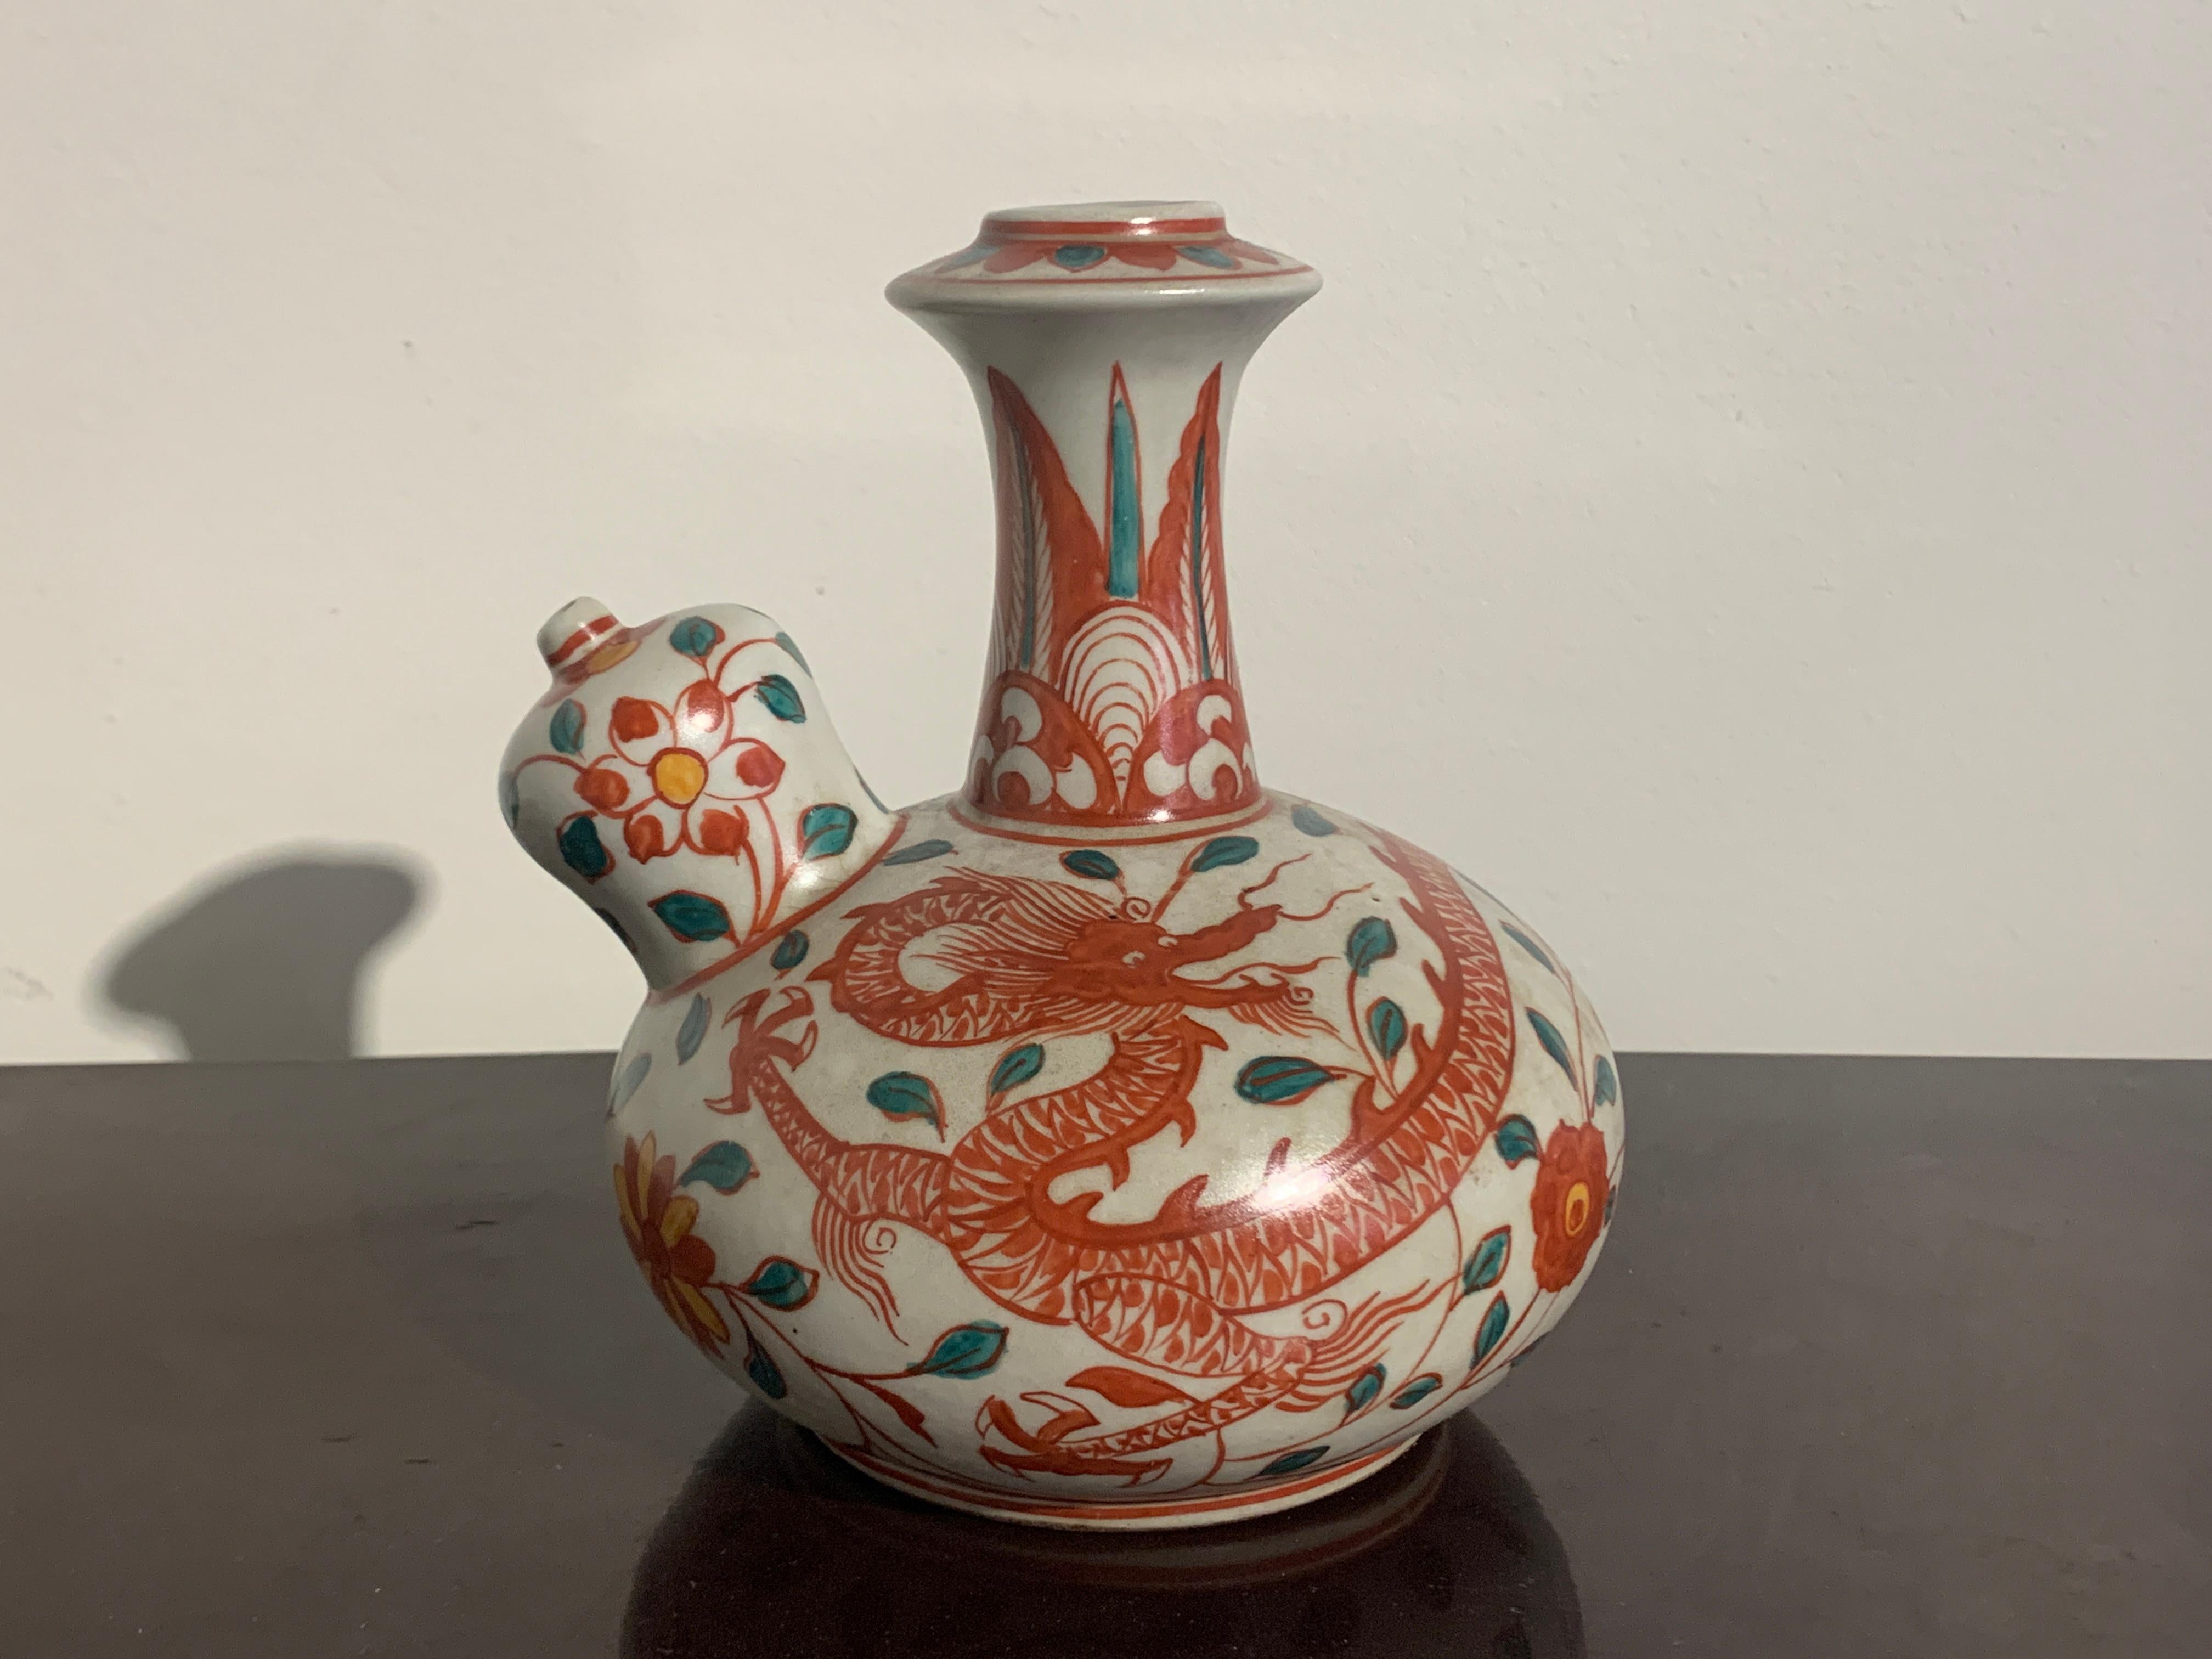 A delightful Swatow ware Chinese export shipwreck porcelain kendi featuring a writing dragon and an apocryphal Tongzhi mark, late 19th or early 20th century, China, made for the Indonesian market. 

The kendi is decorated in wonderful and